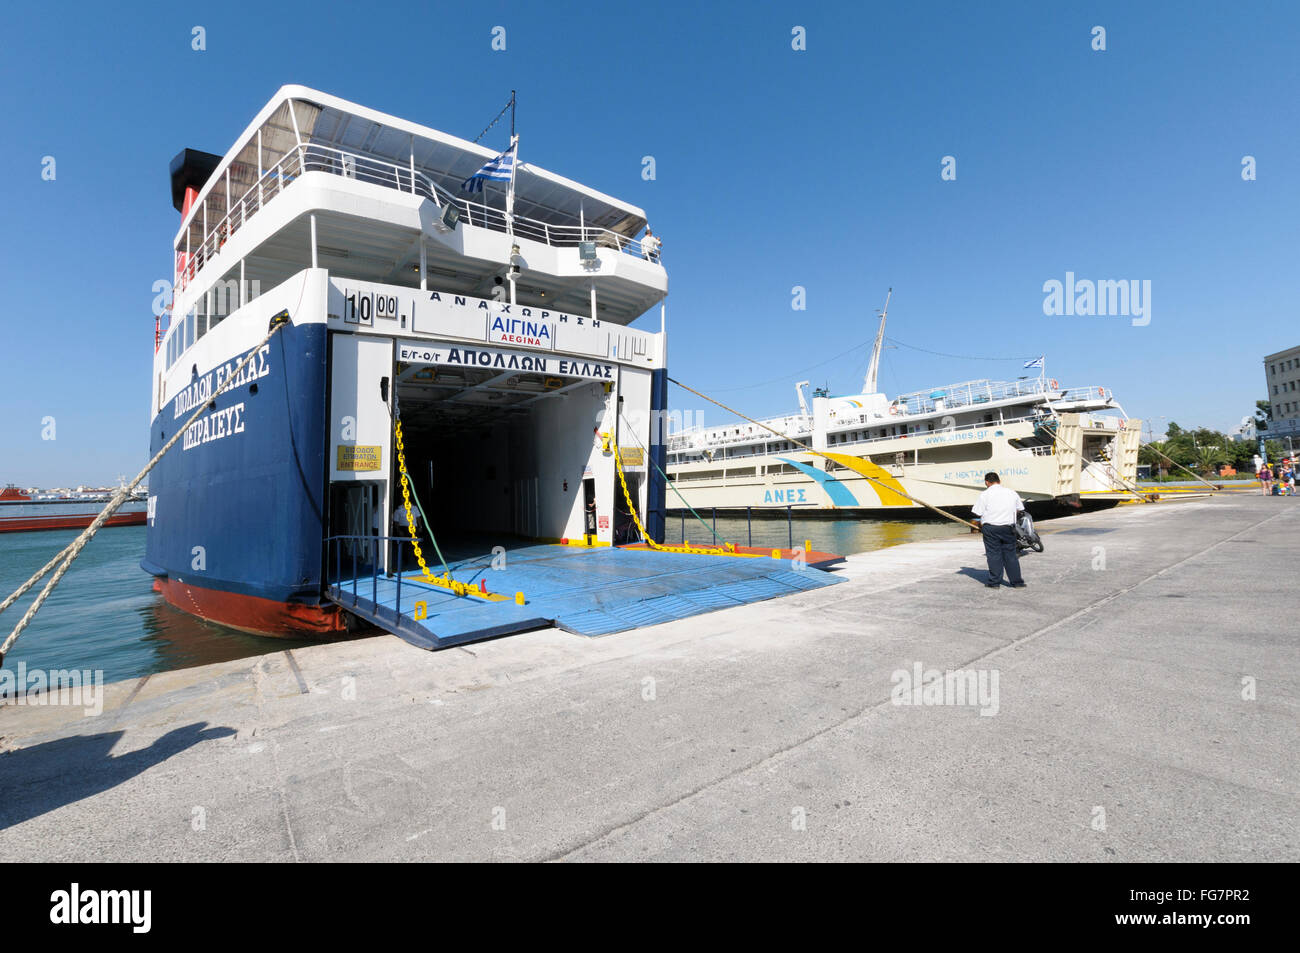 A roll-on/roll-off ferry  with the stern ramp down at the port of Piraeus, Athens, Greece. Stock Photo